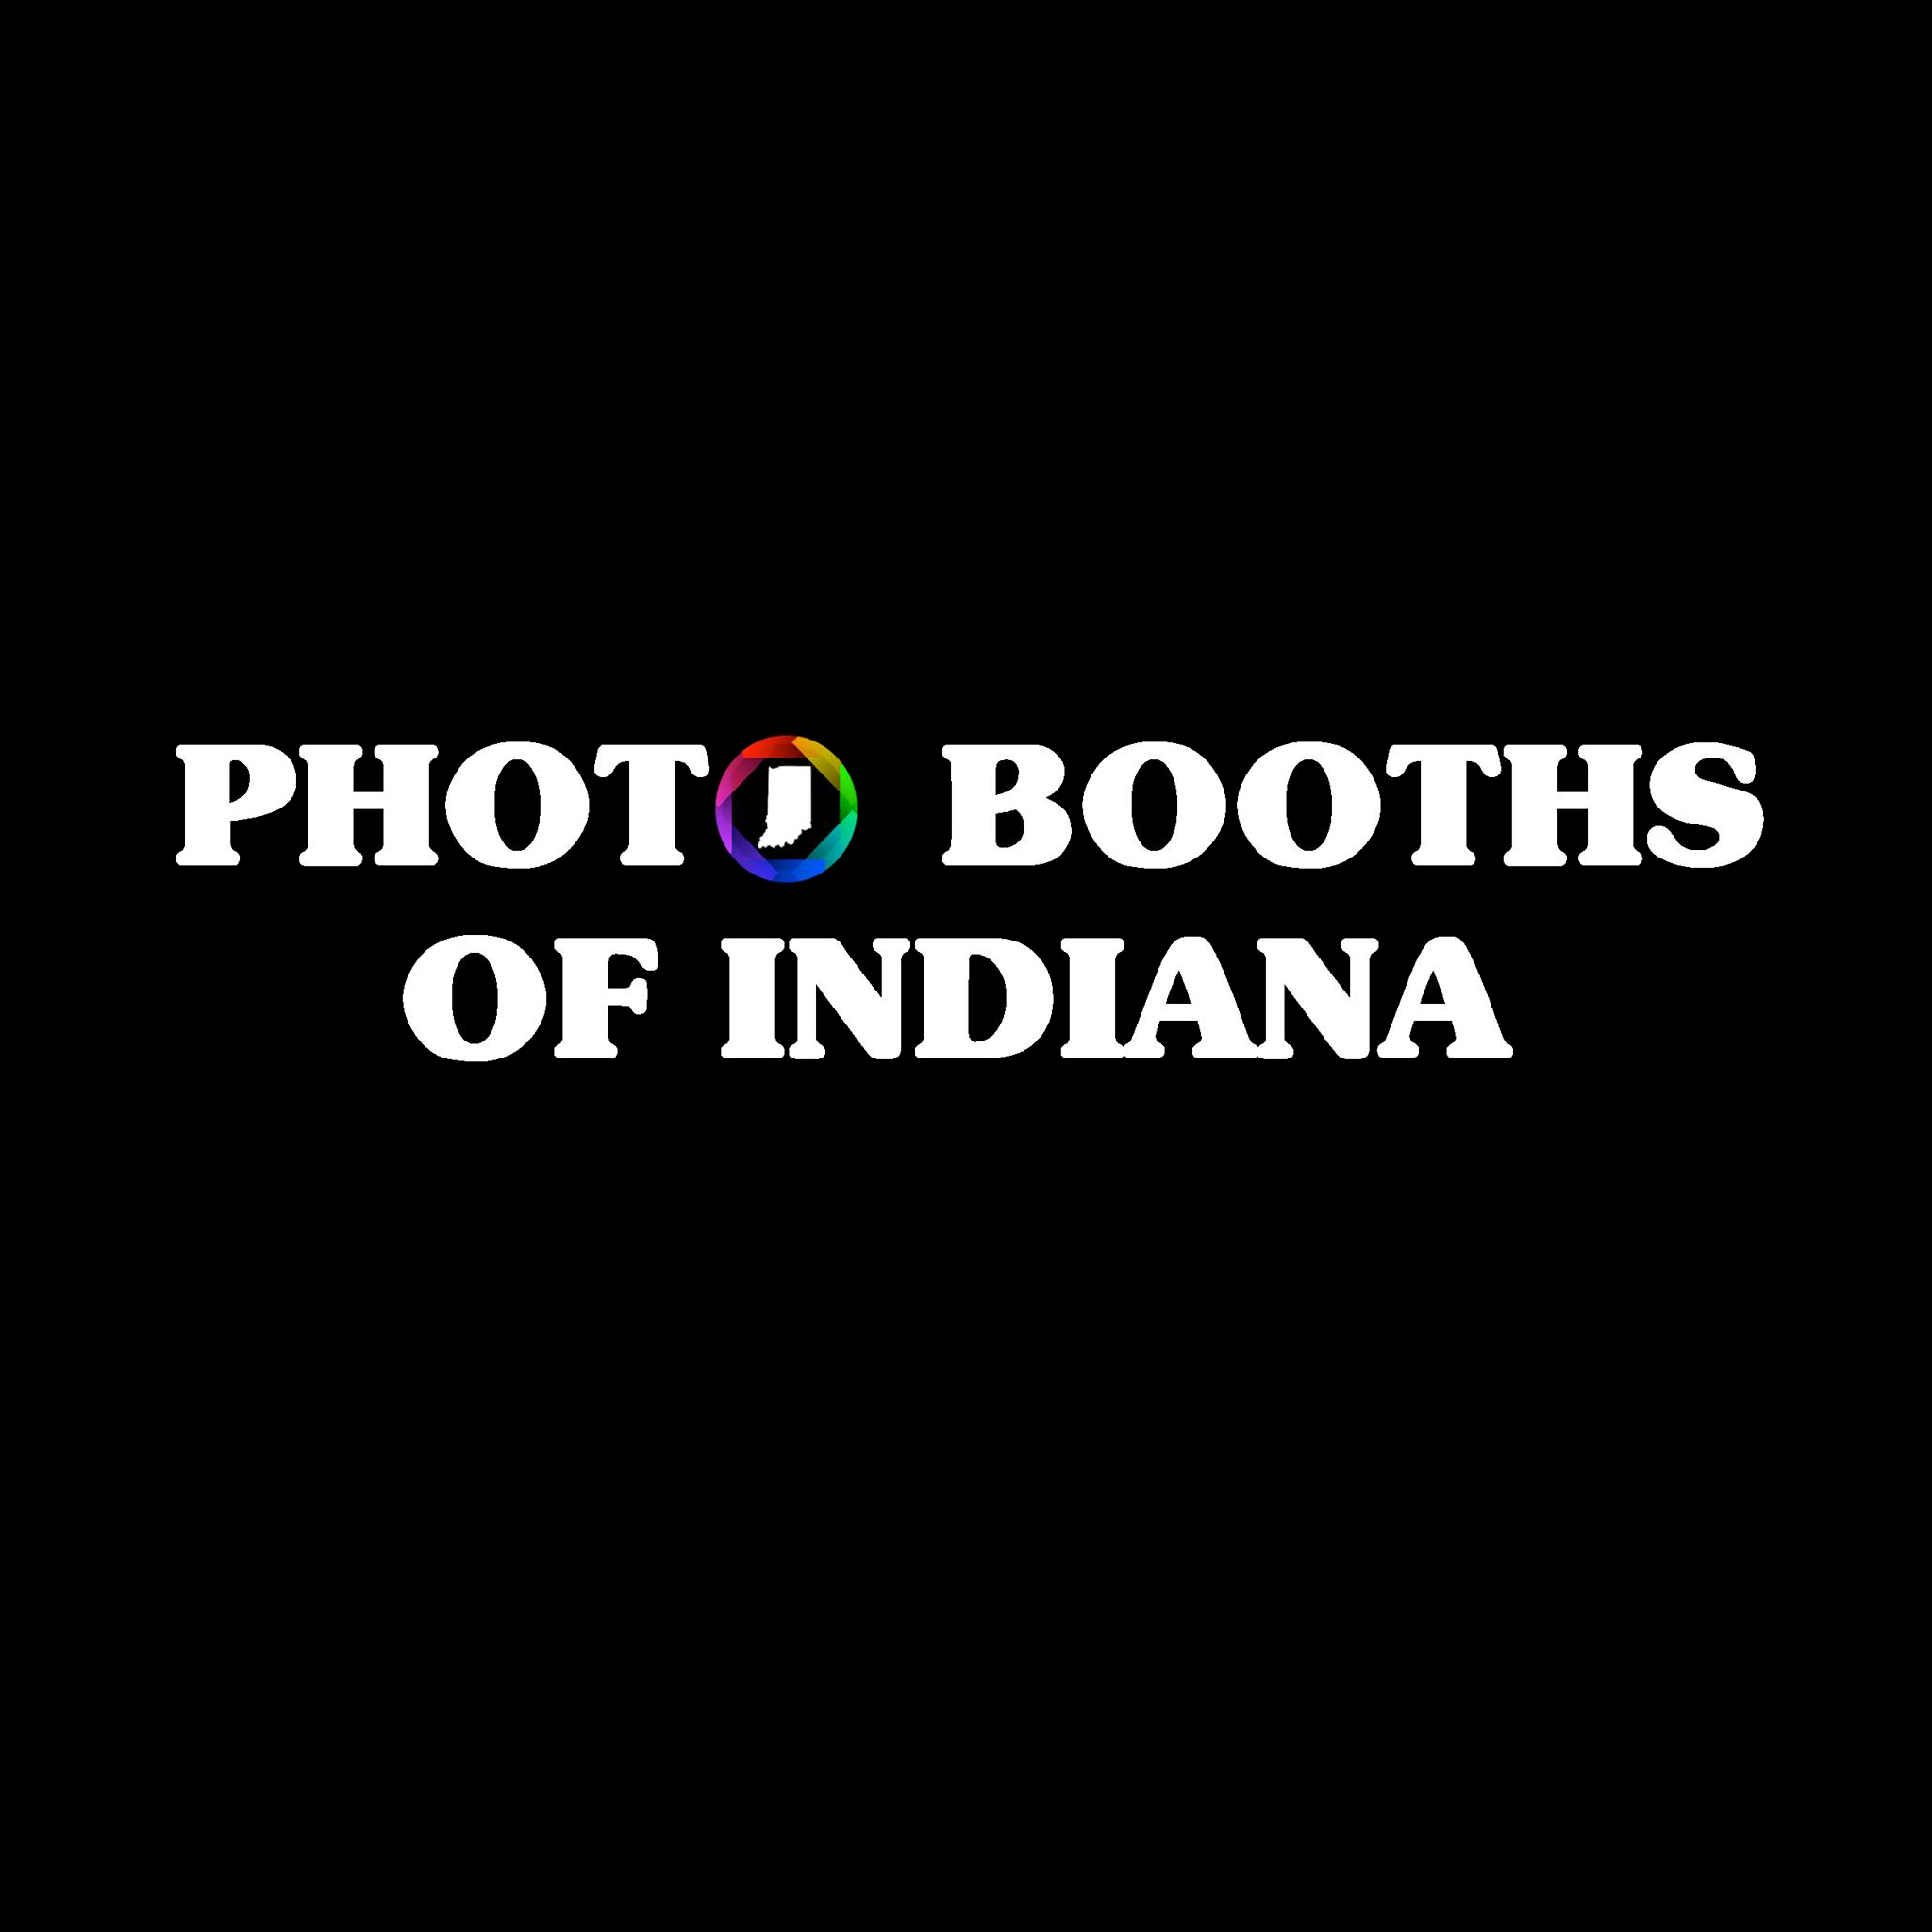 Photo booths of Indiana Logo